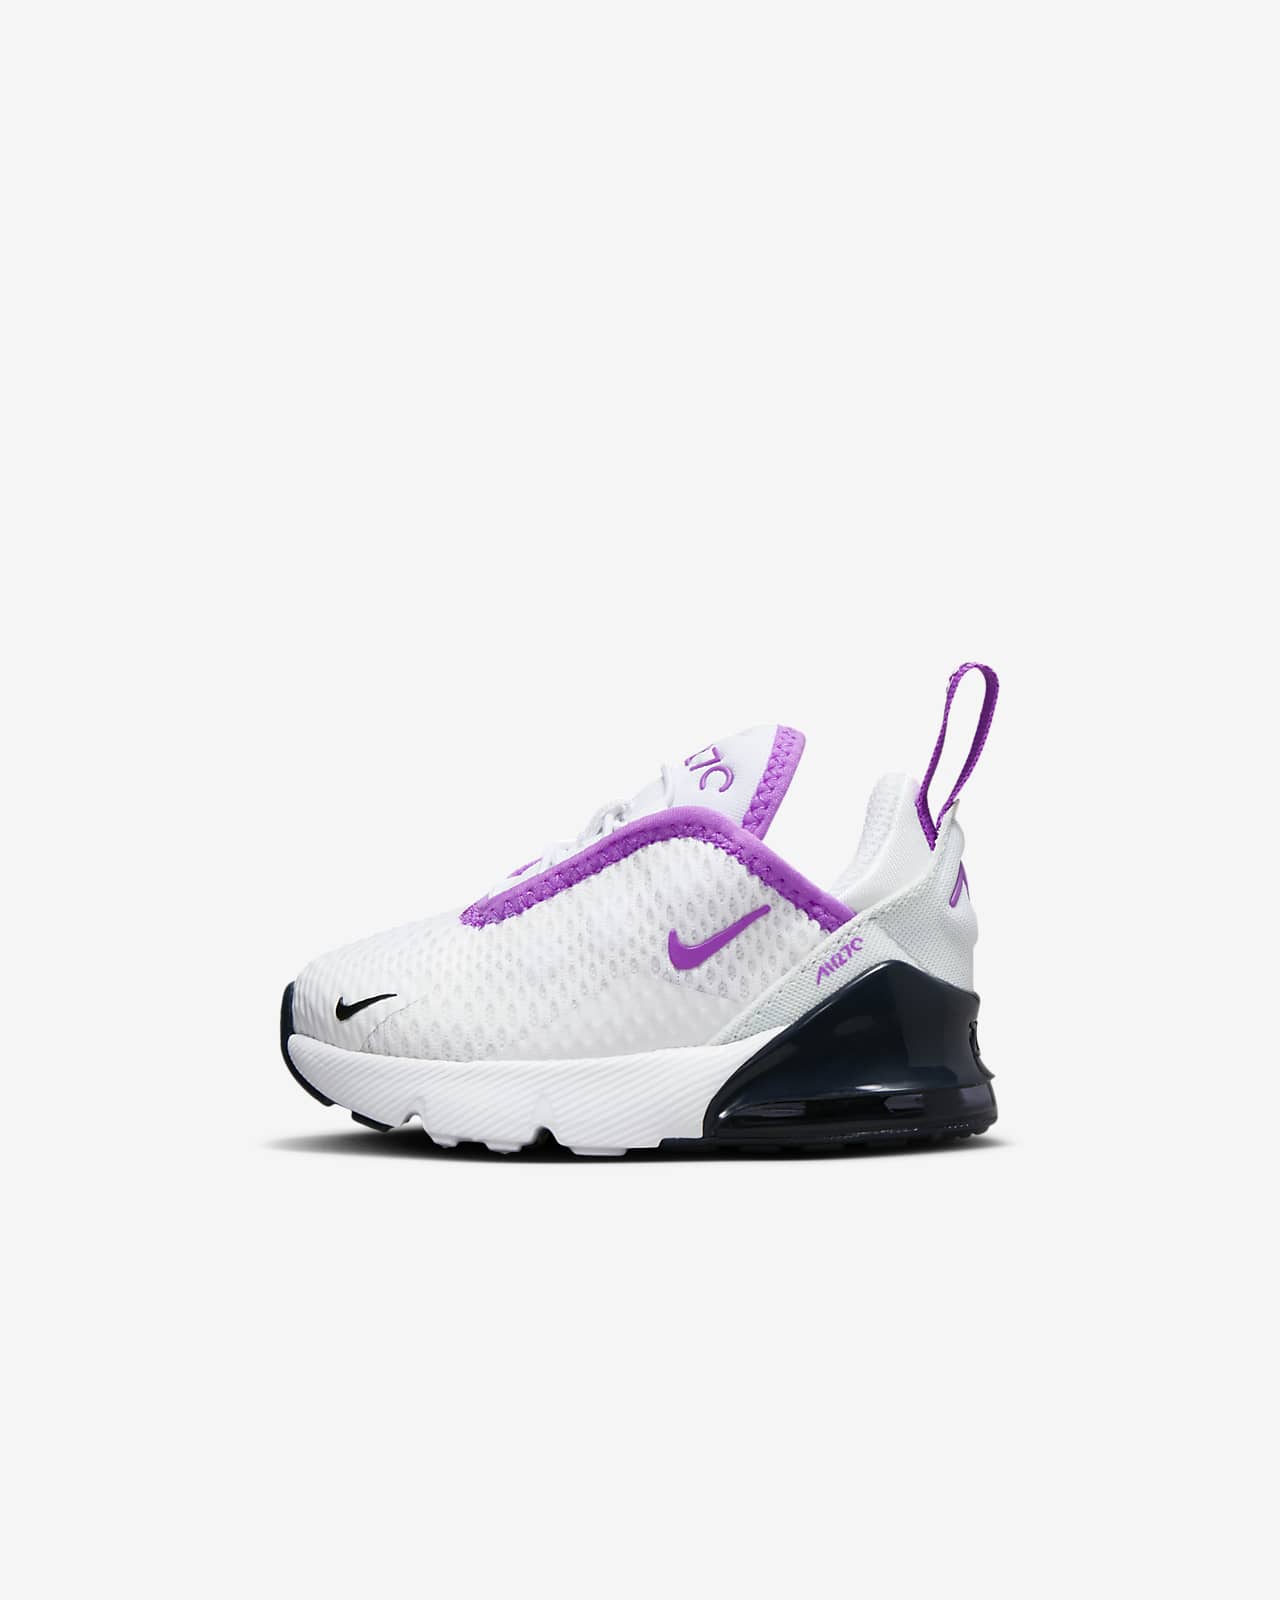 Nike Air Max 270 Trainers in White and Purple